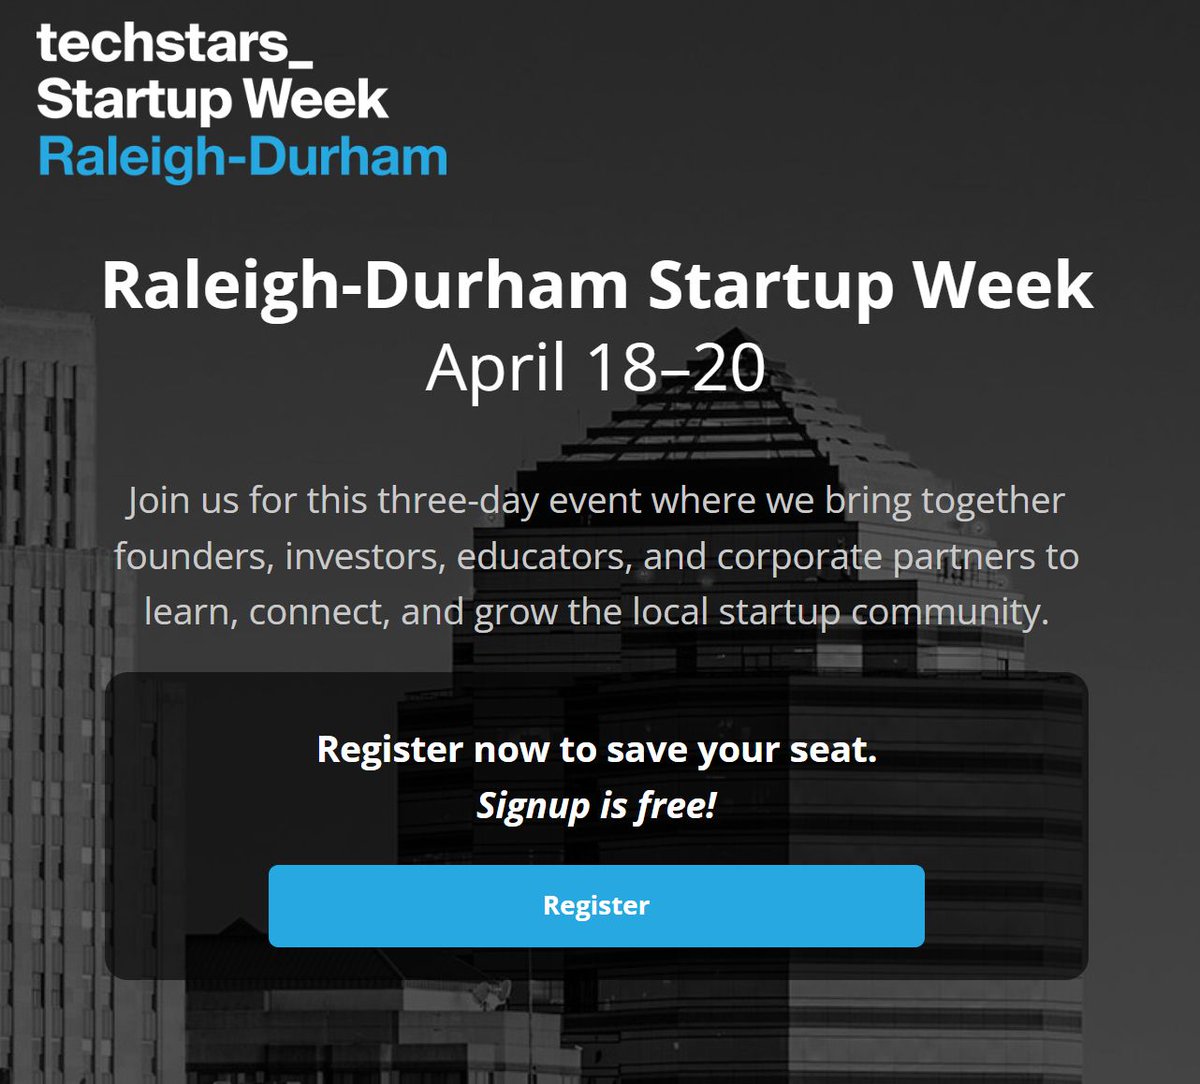 @ffvcnc 's President, @KristaCovey, set to moderate an
insightful fireside chat with Dr. Chris Monroe, Co-Founder of IonQ.  

Register Today! raleighdurhamstartupweek.com

#RaleighDurhamStartupWeek #FFVC #FirstFlight #KristaCovey